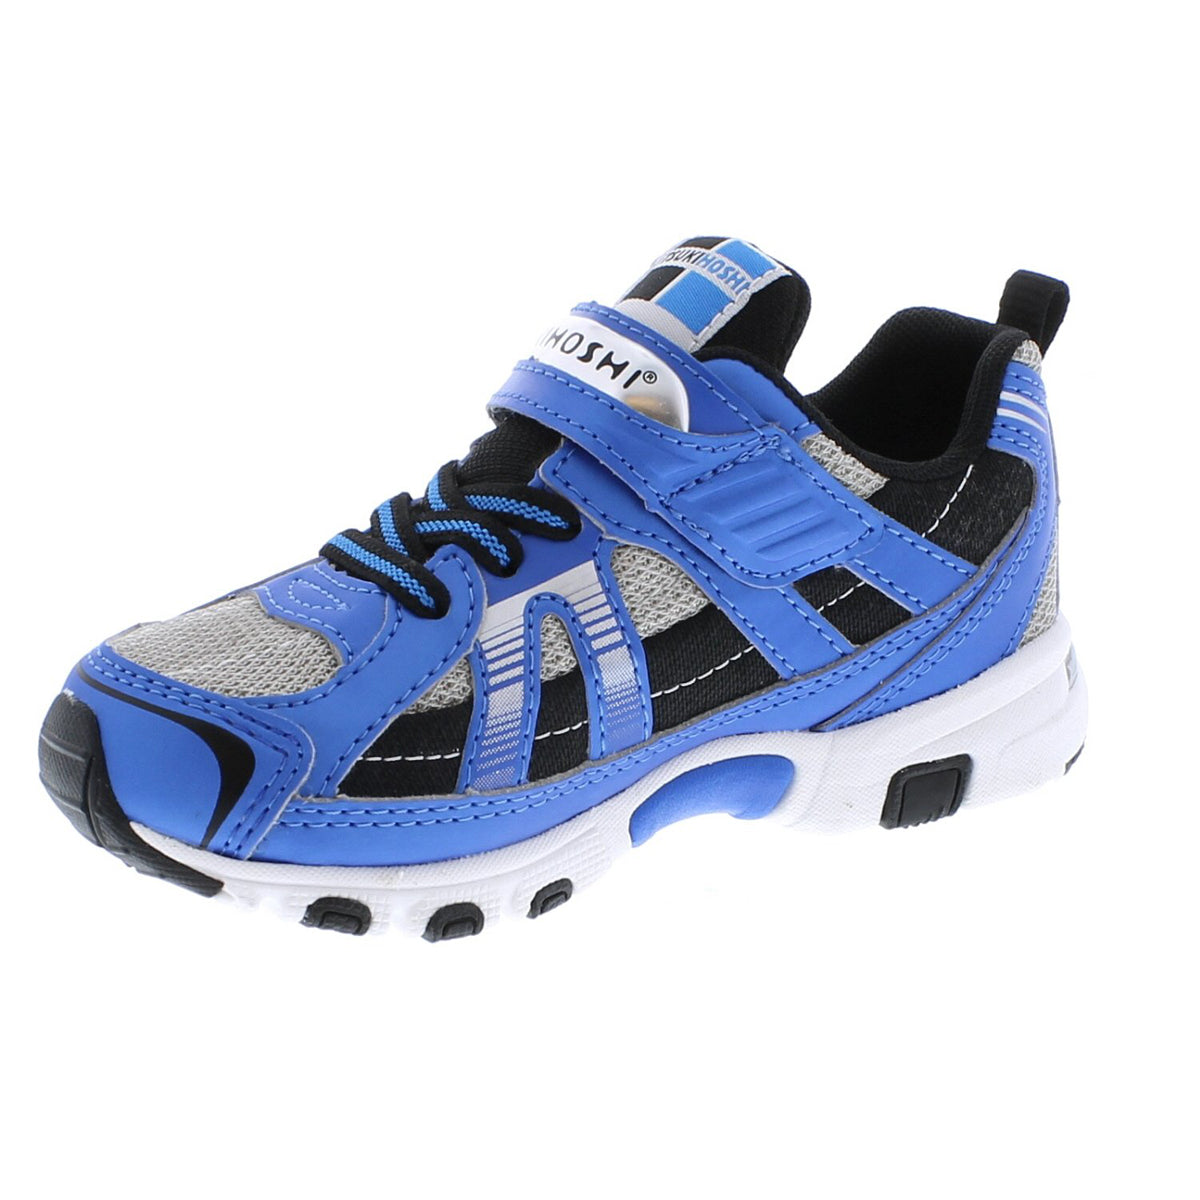 Childrens Tsukihoshi Storm Sneaker in Blue/Gray from the front view